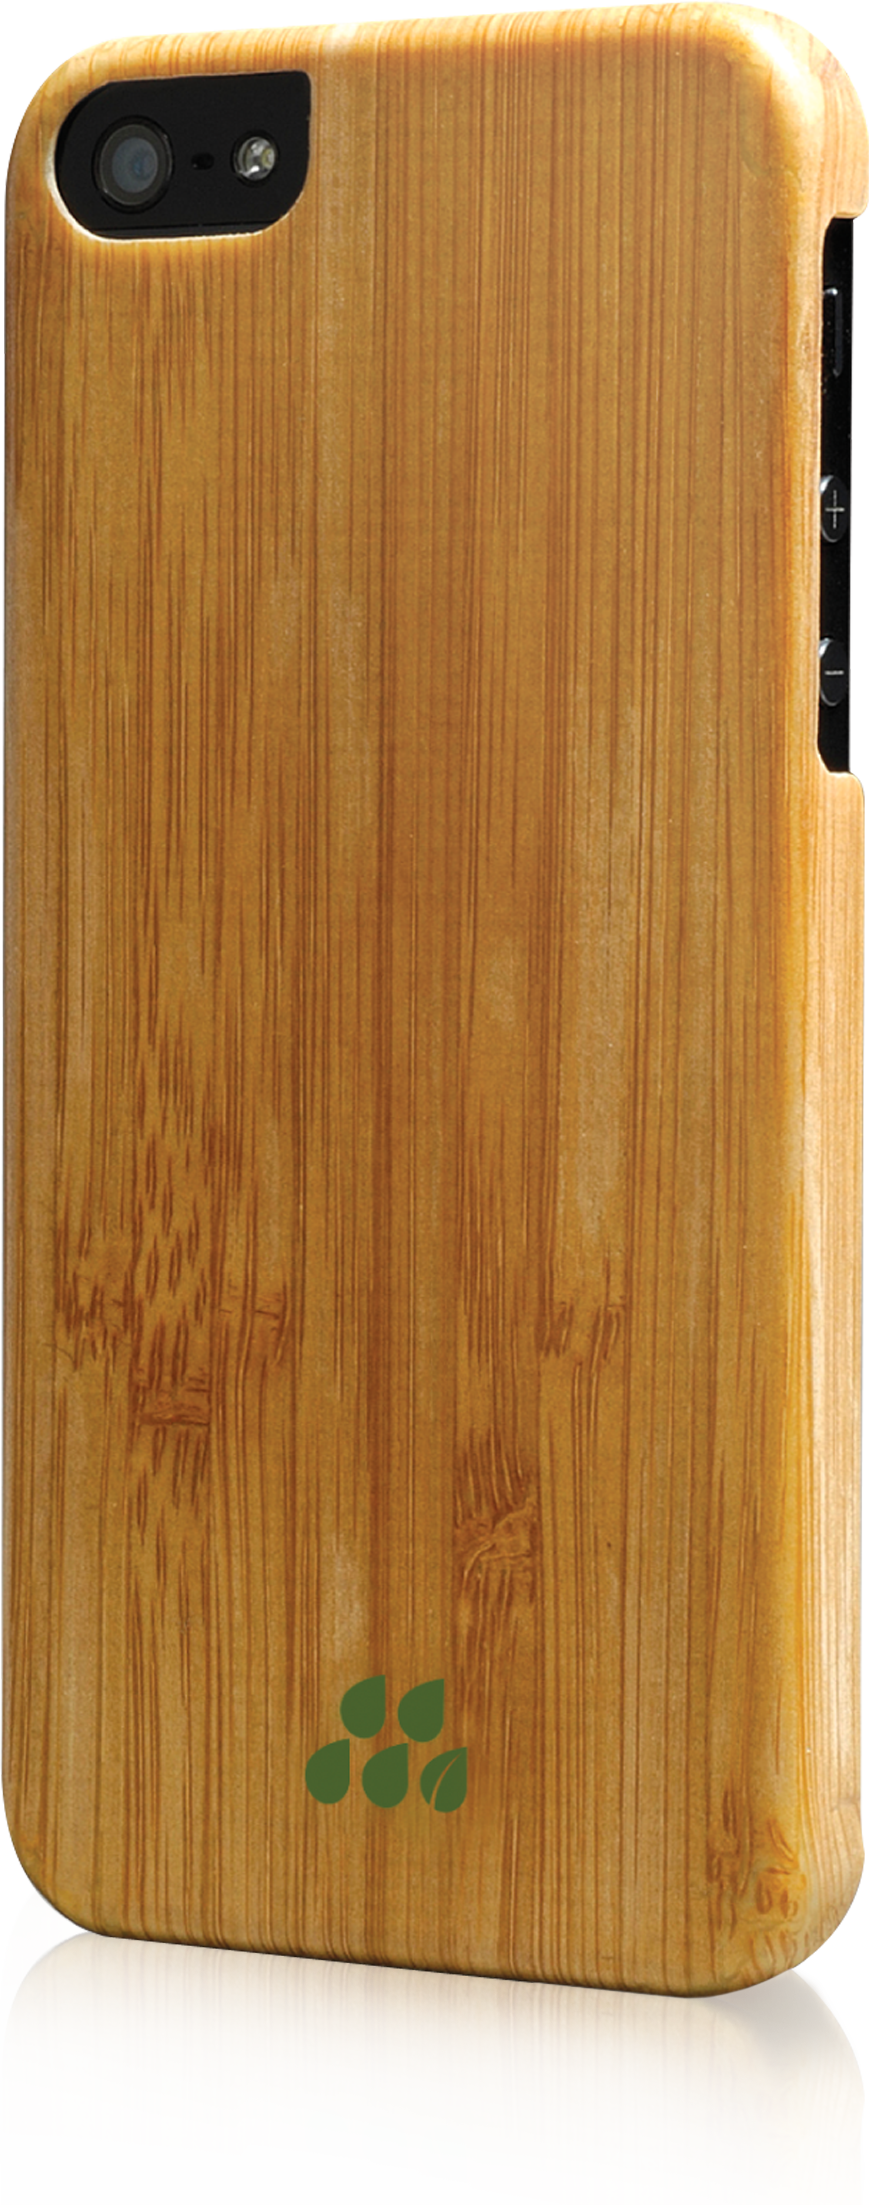 Wood S in Bamboo for iPhone 5/5S